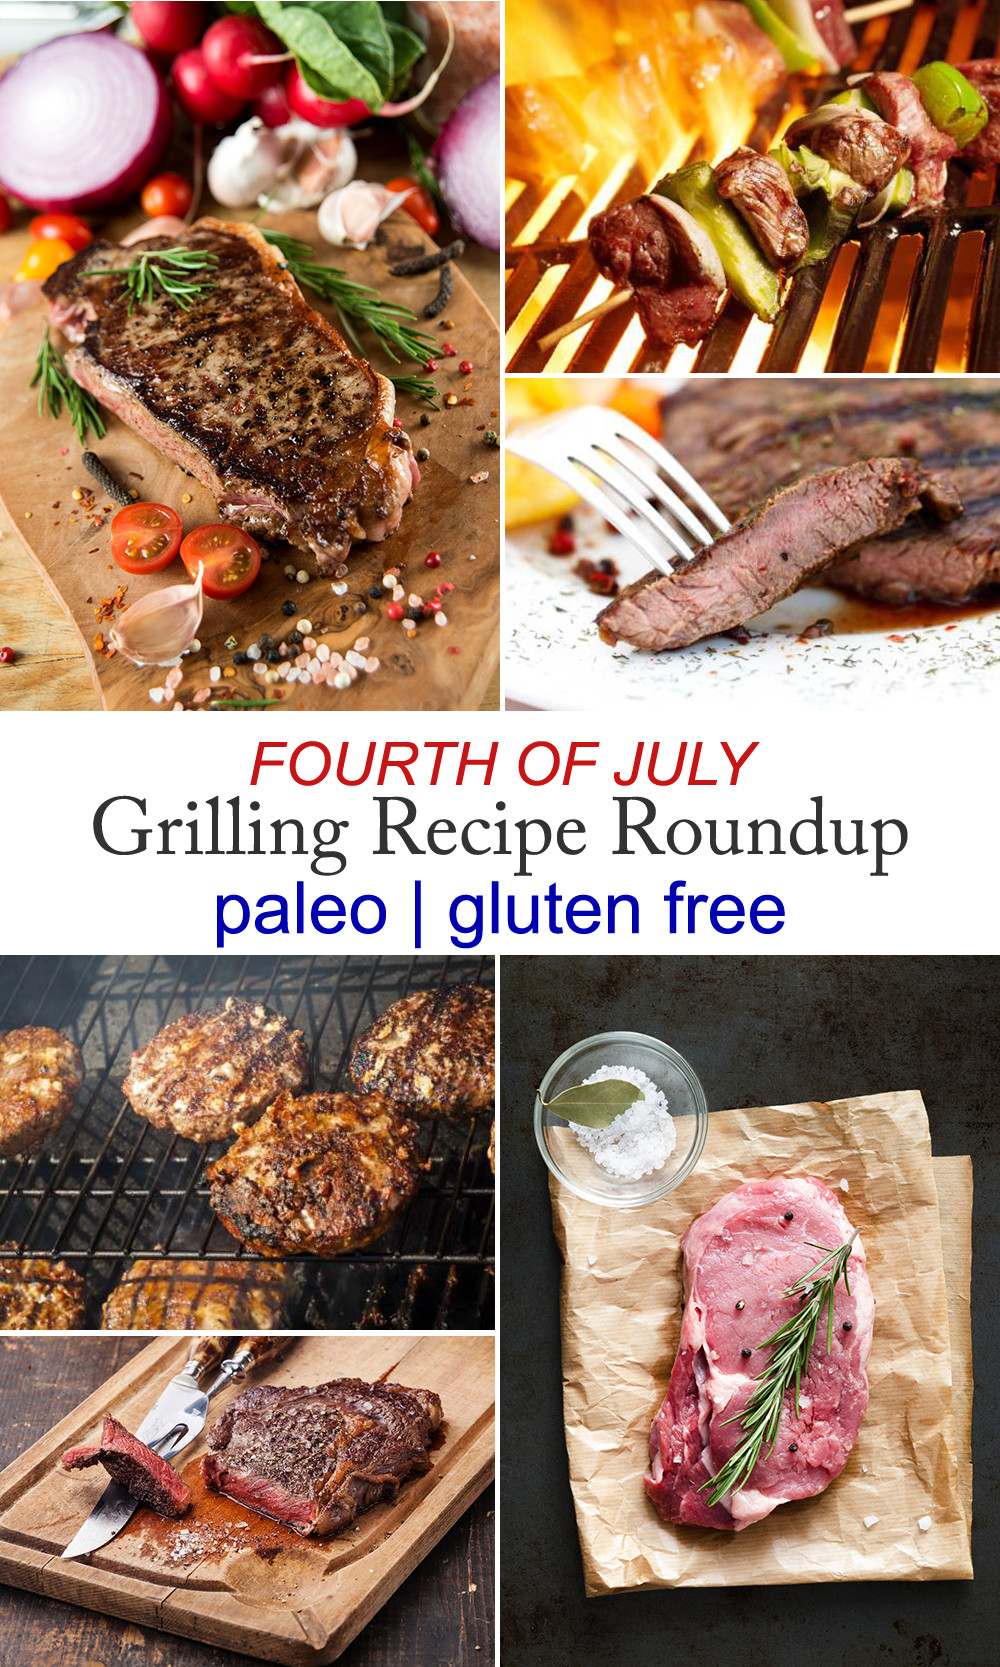 Fourth of july grilling recipe roundup--gluten free and paleo options available!!